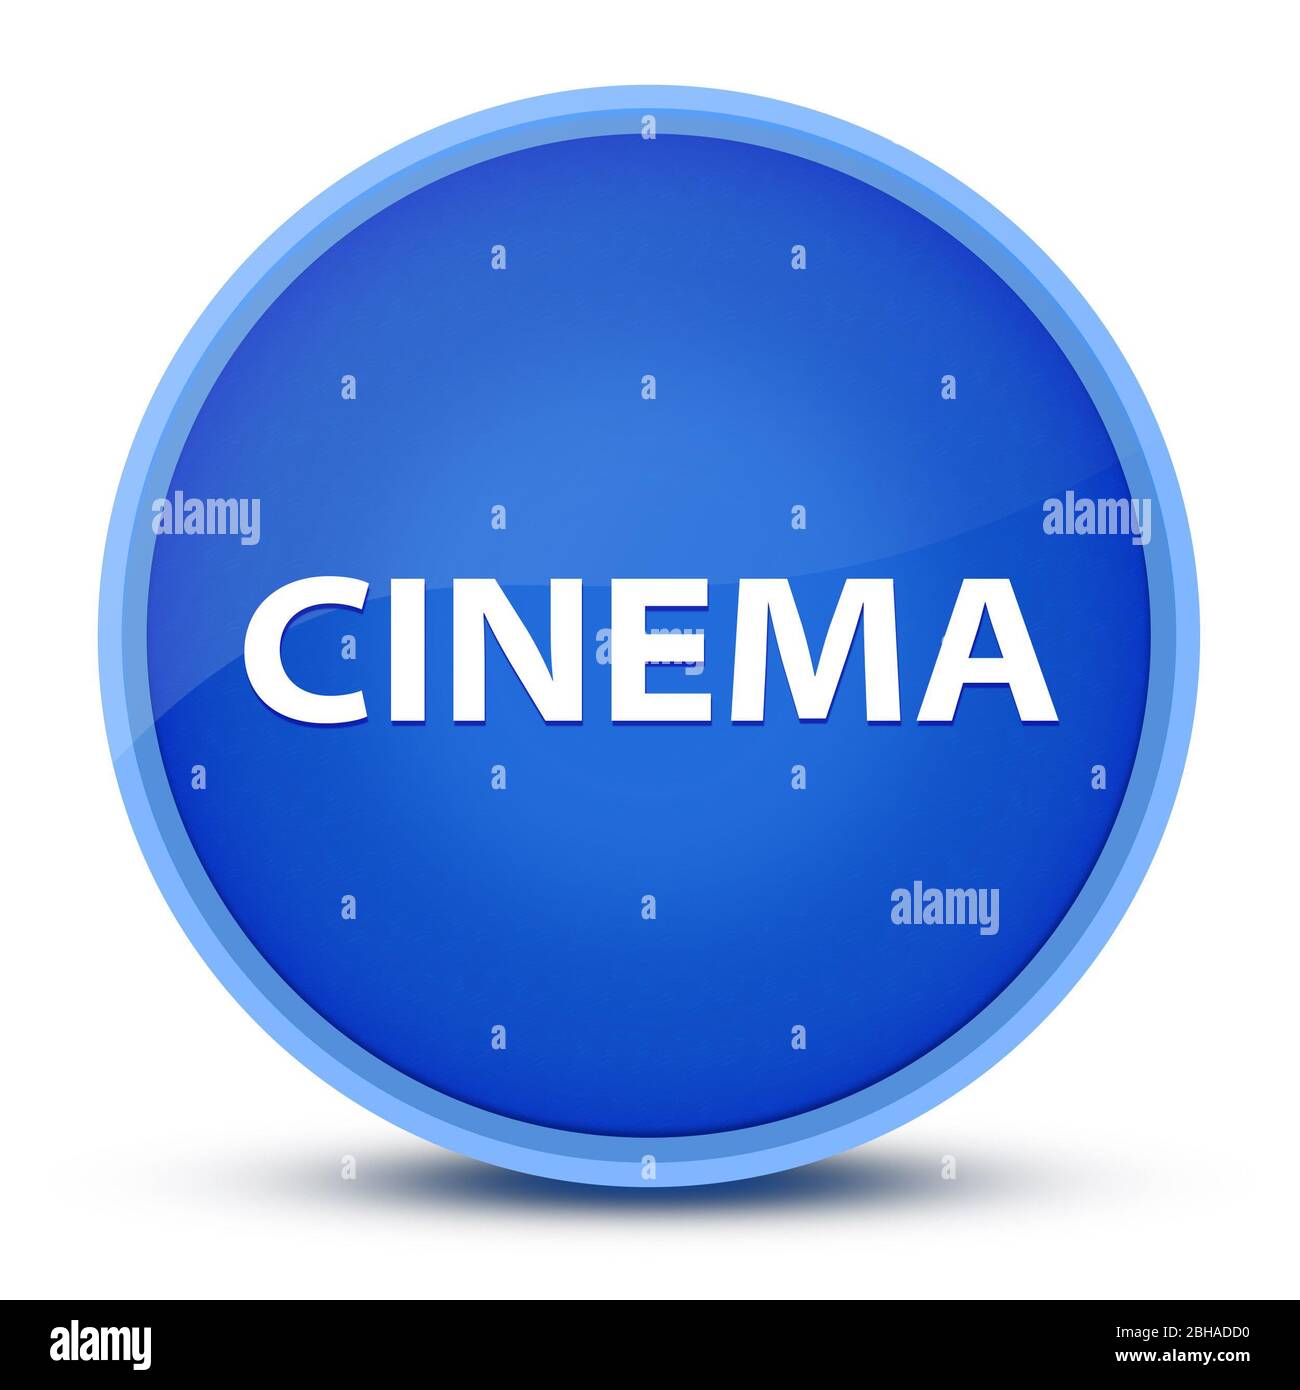 Cinema isolated on special blue round button abstract illustration Stock Photo